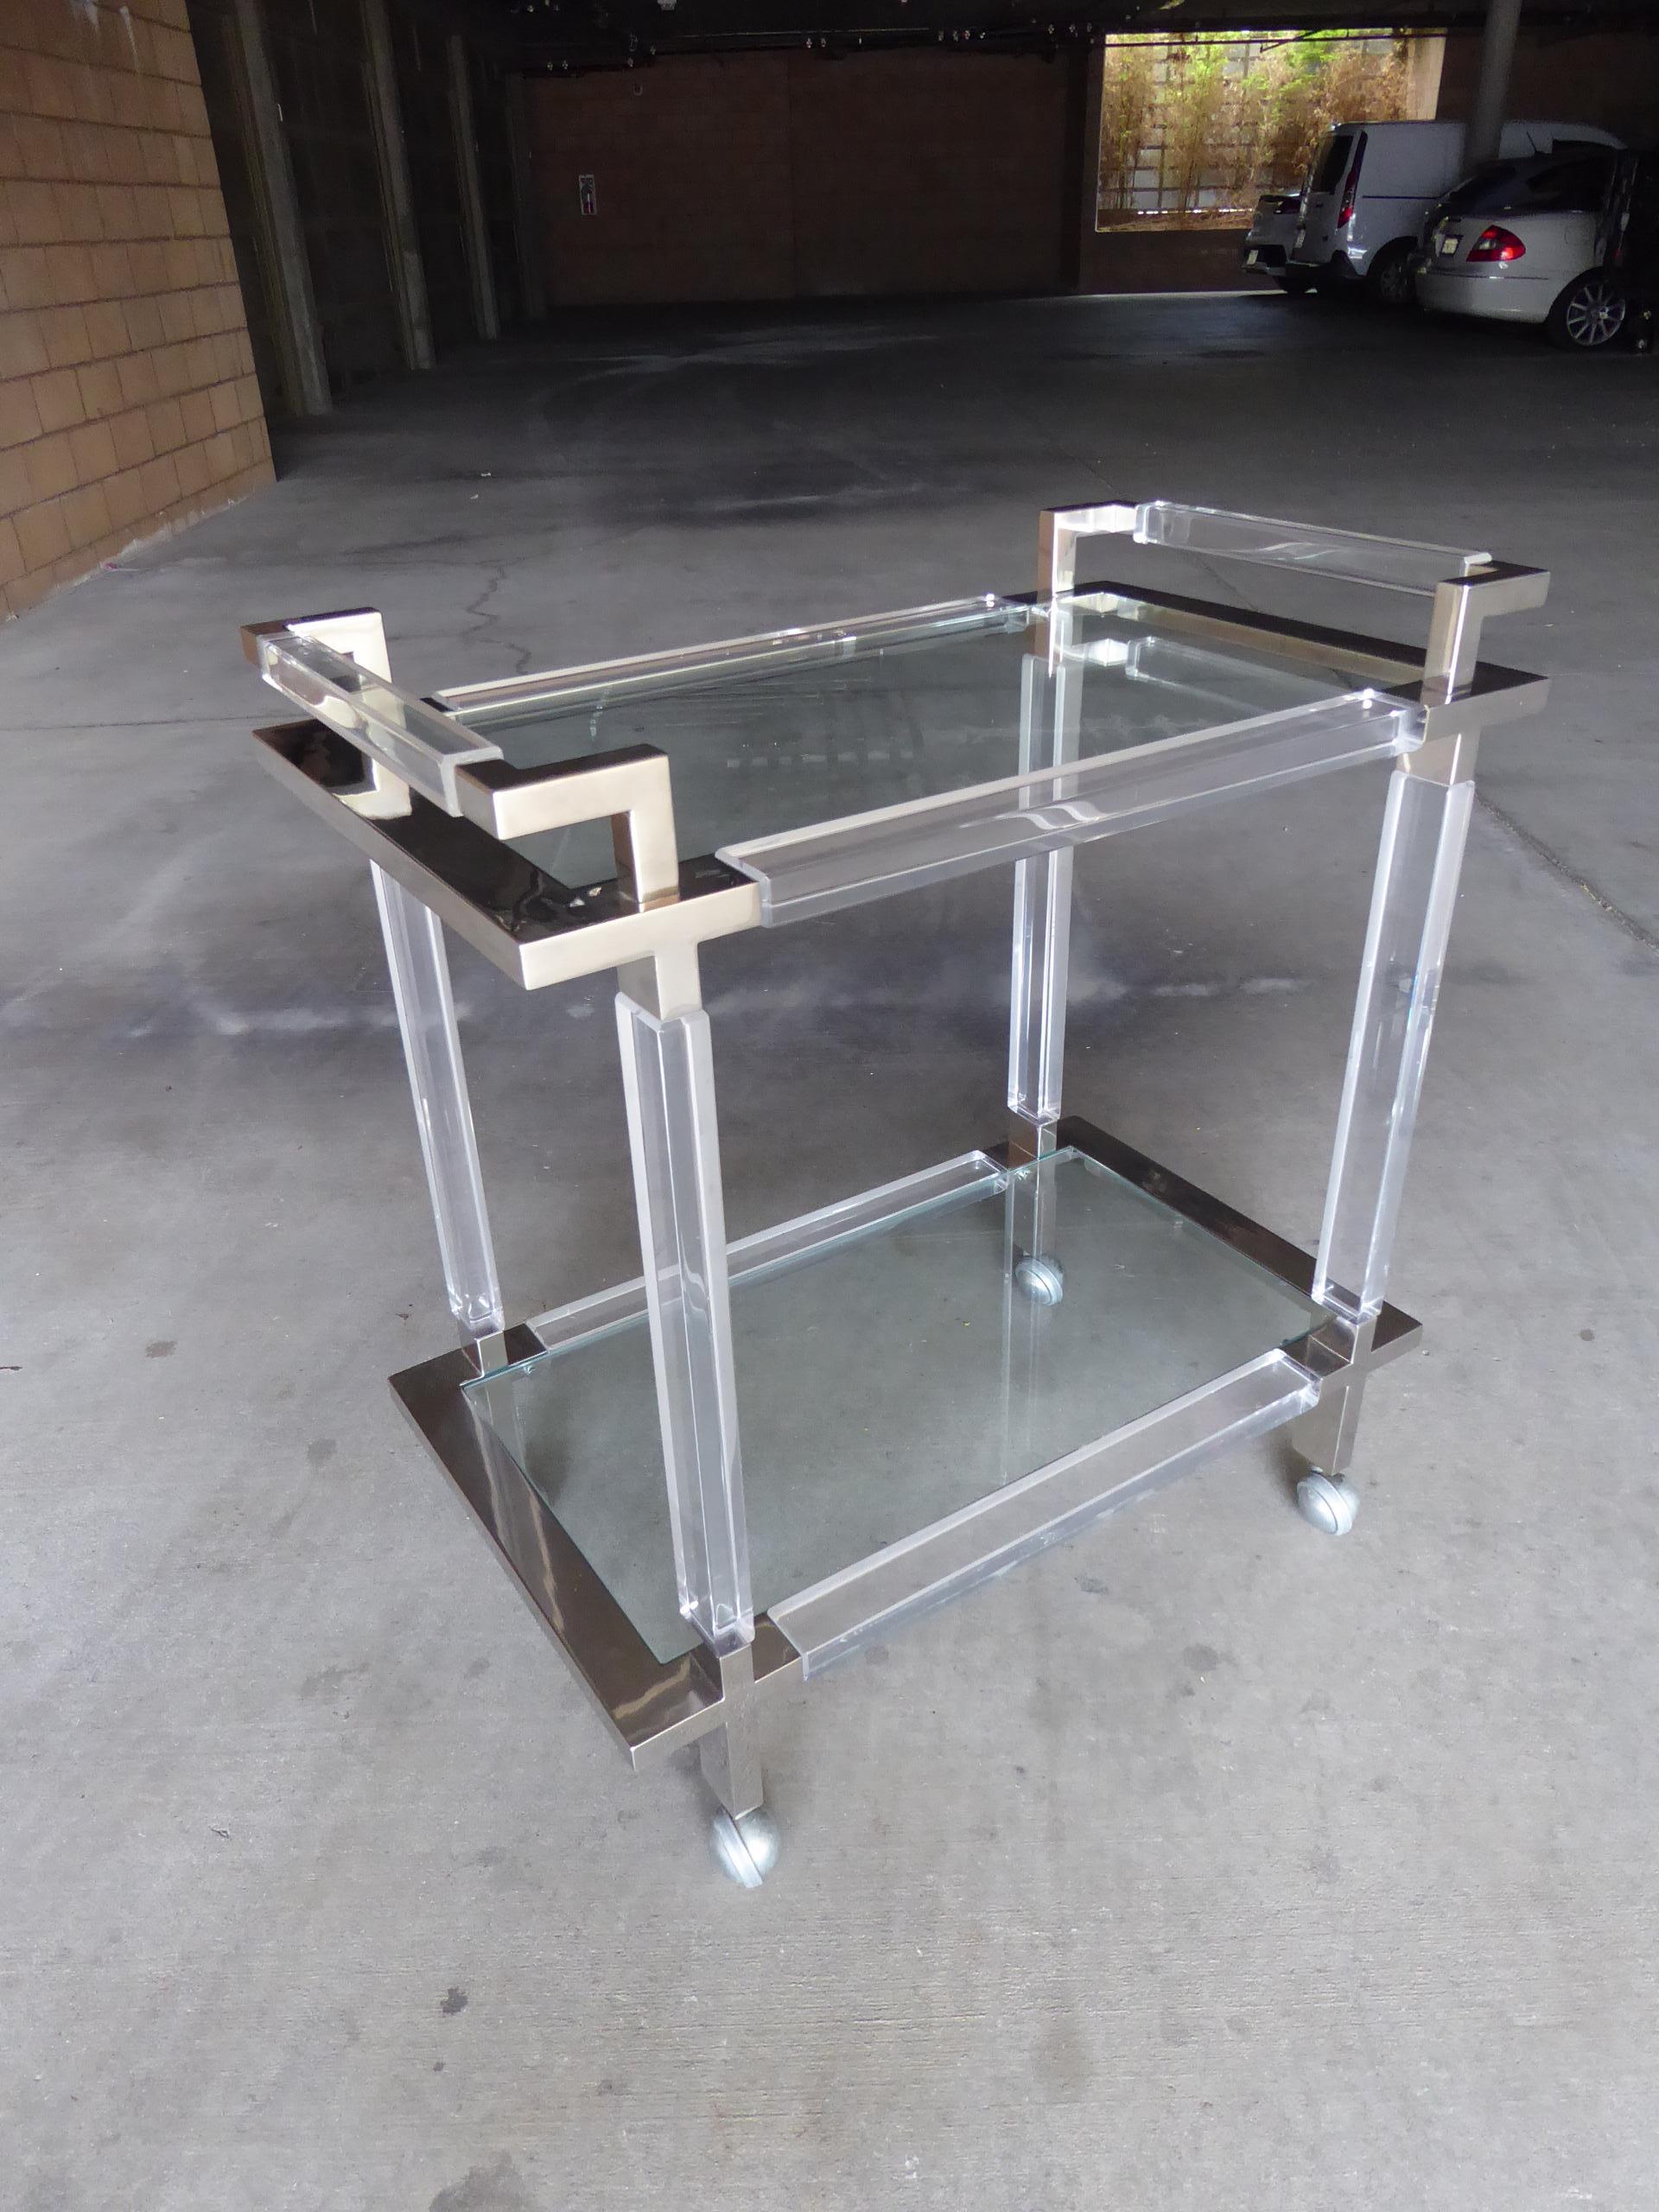 A vintage Lucite, brushed chrome and glass two-tier serving or bar cart designed as part of the metric line by Charles Hollis Jones and made by the Hudson-Rissman Company in the 1970s.